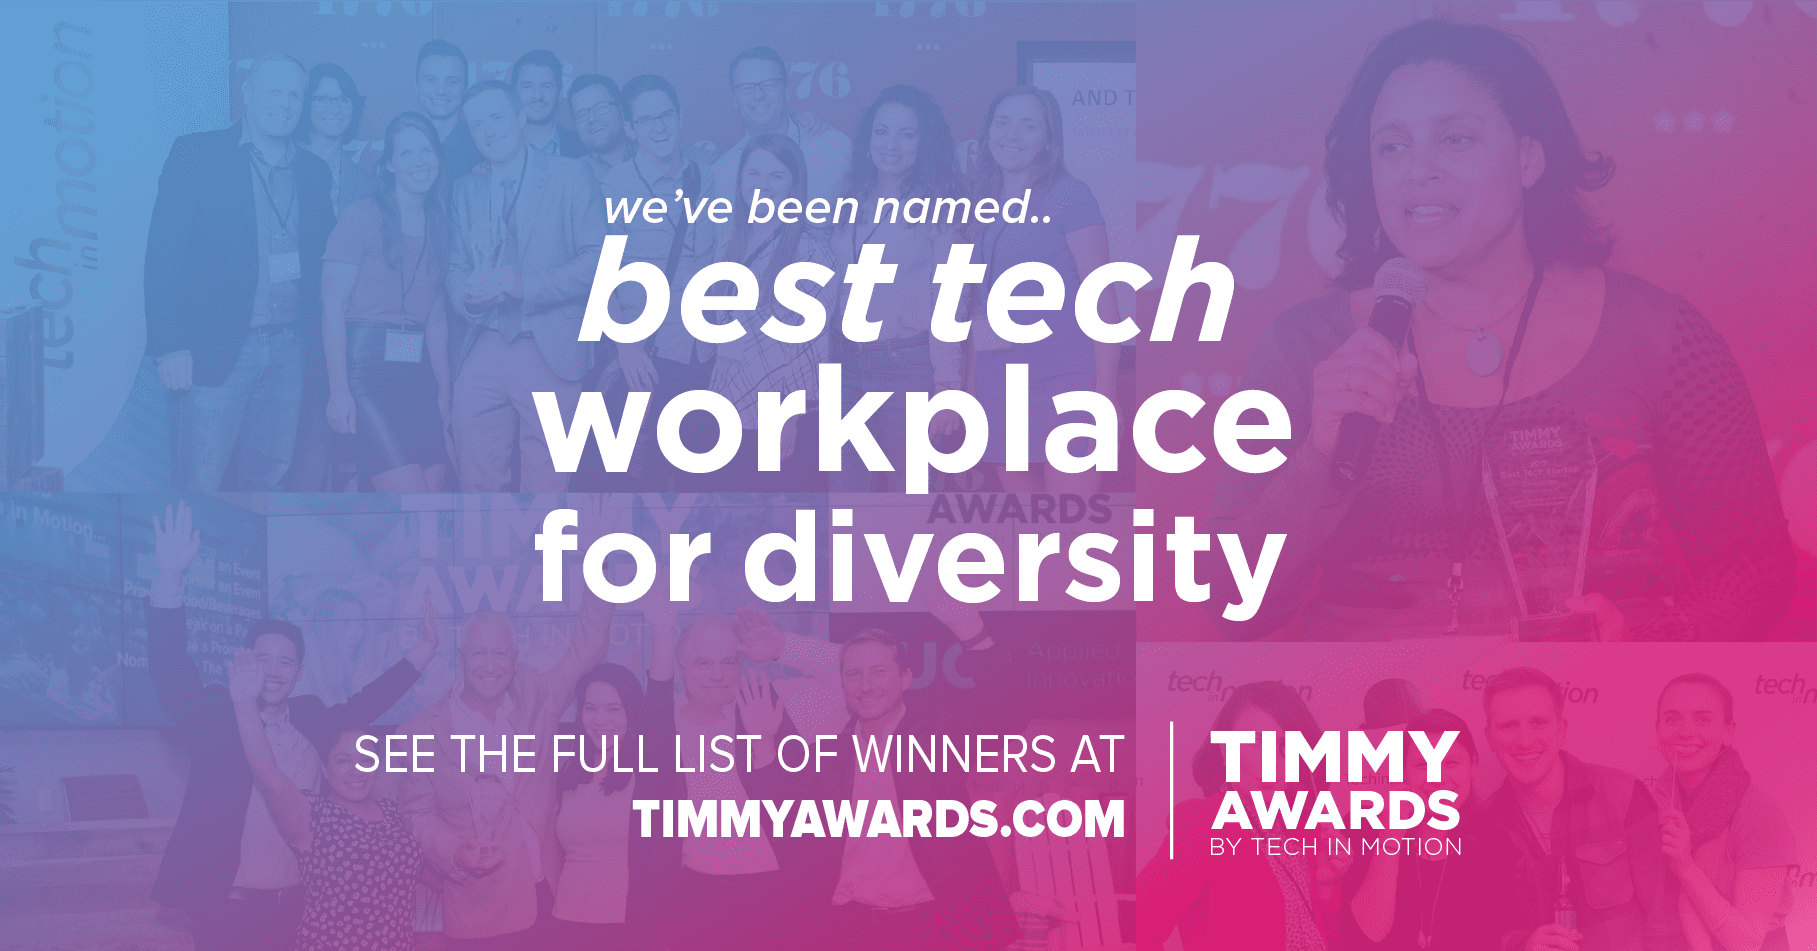 Poster announcing DAP being named as Digital Authority Partners as the Best Tech Workplace for Diversity in 2018.